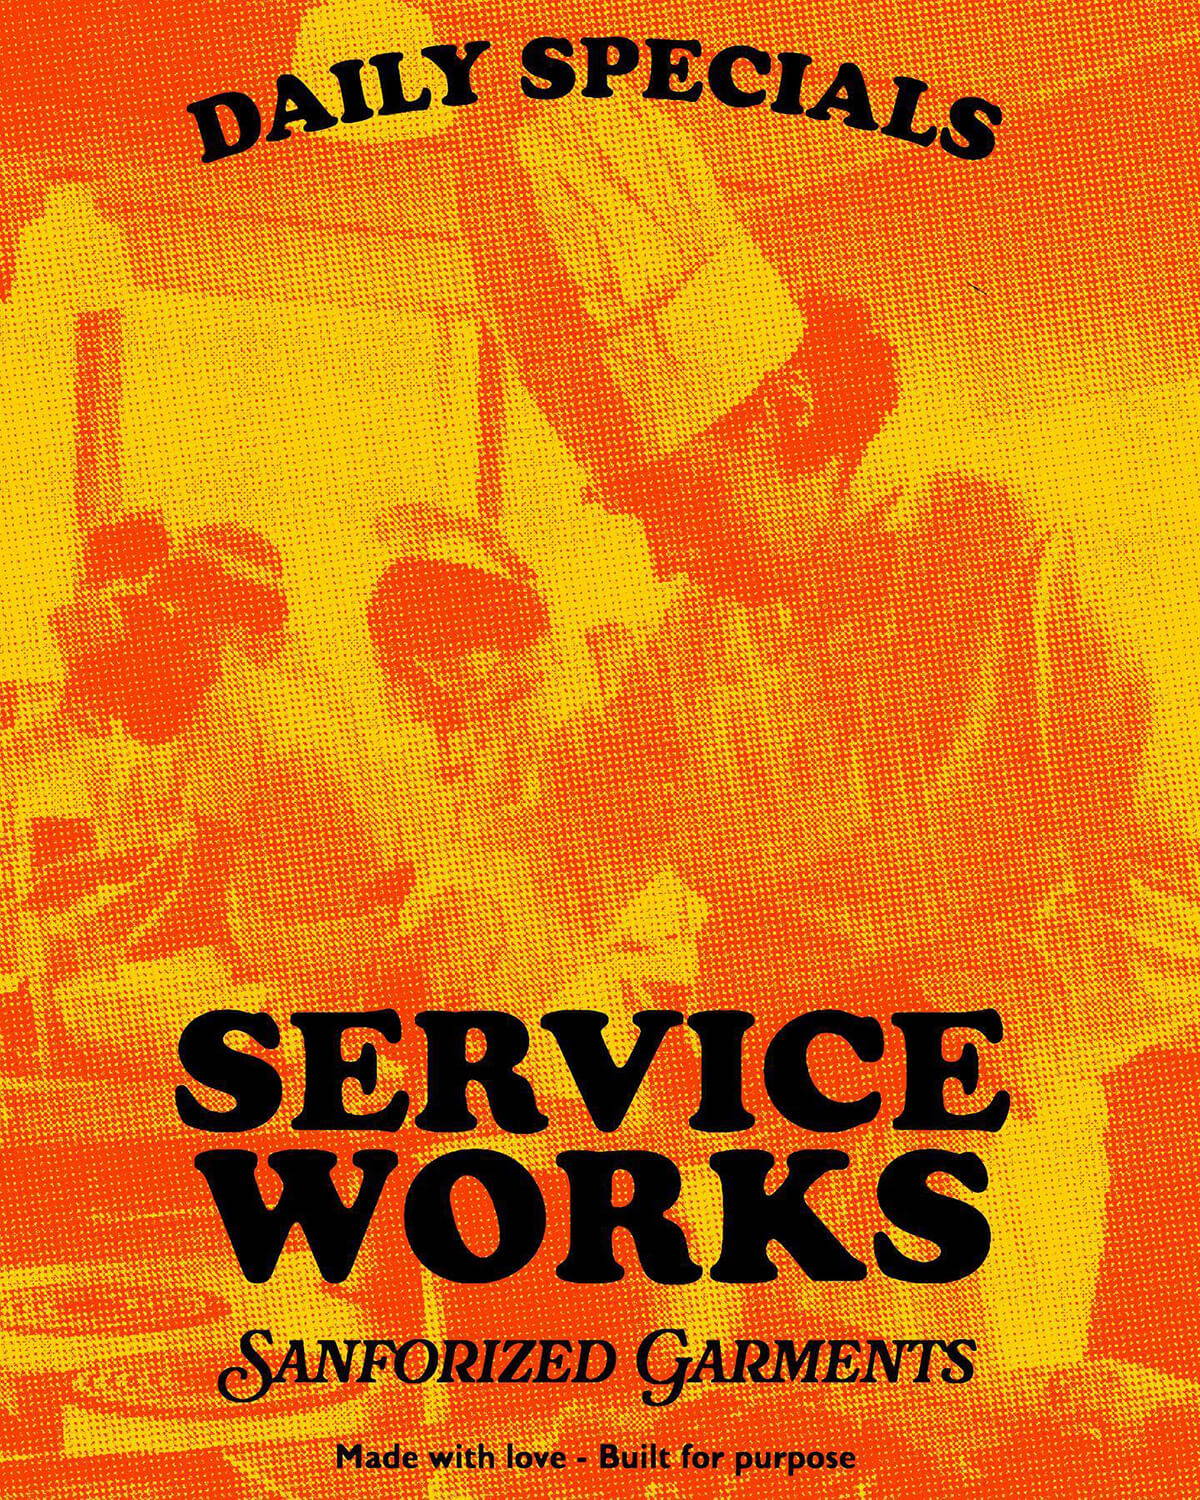 A Service Works graphic poster.